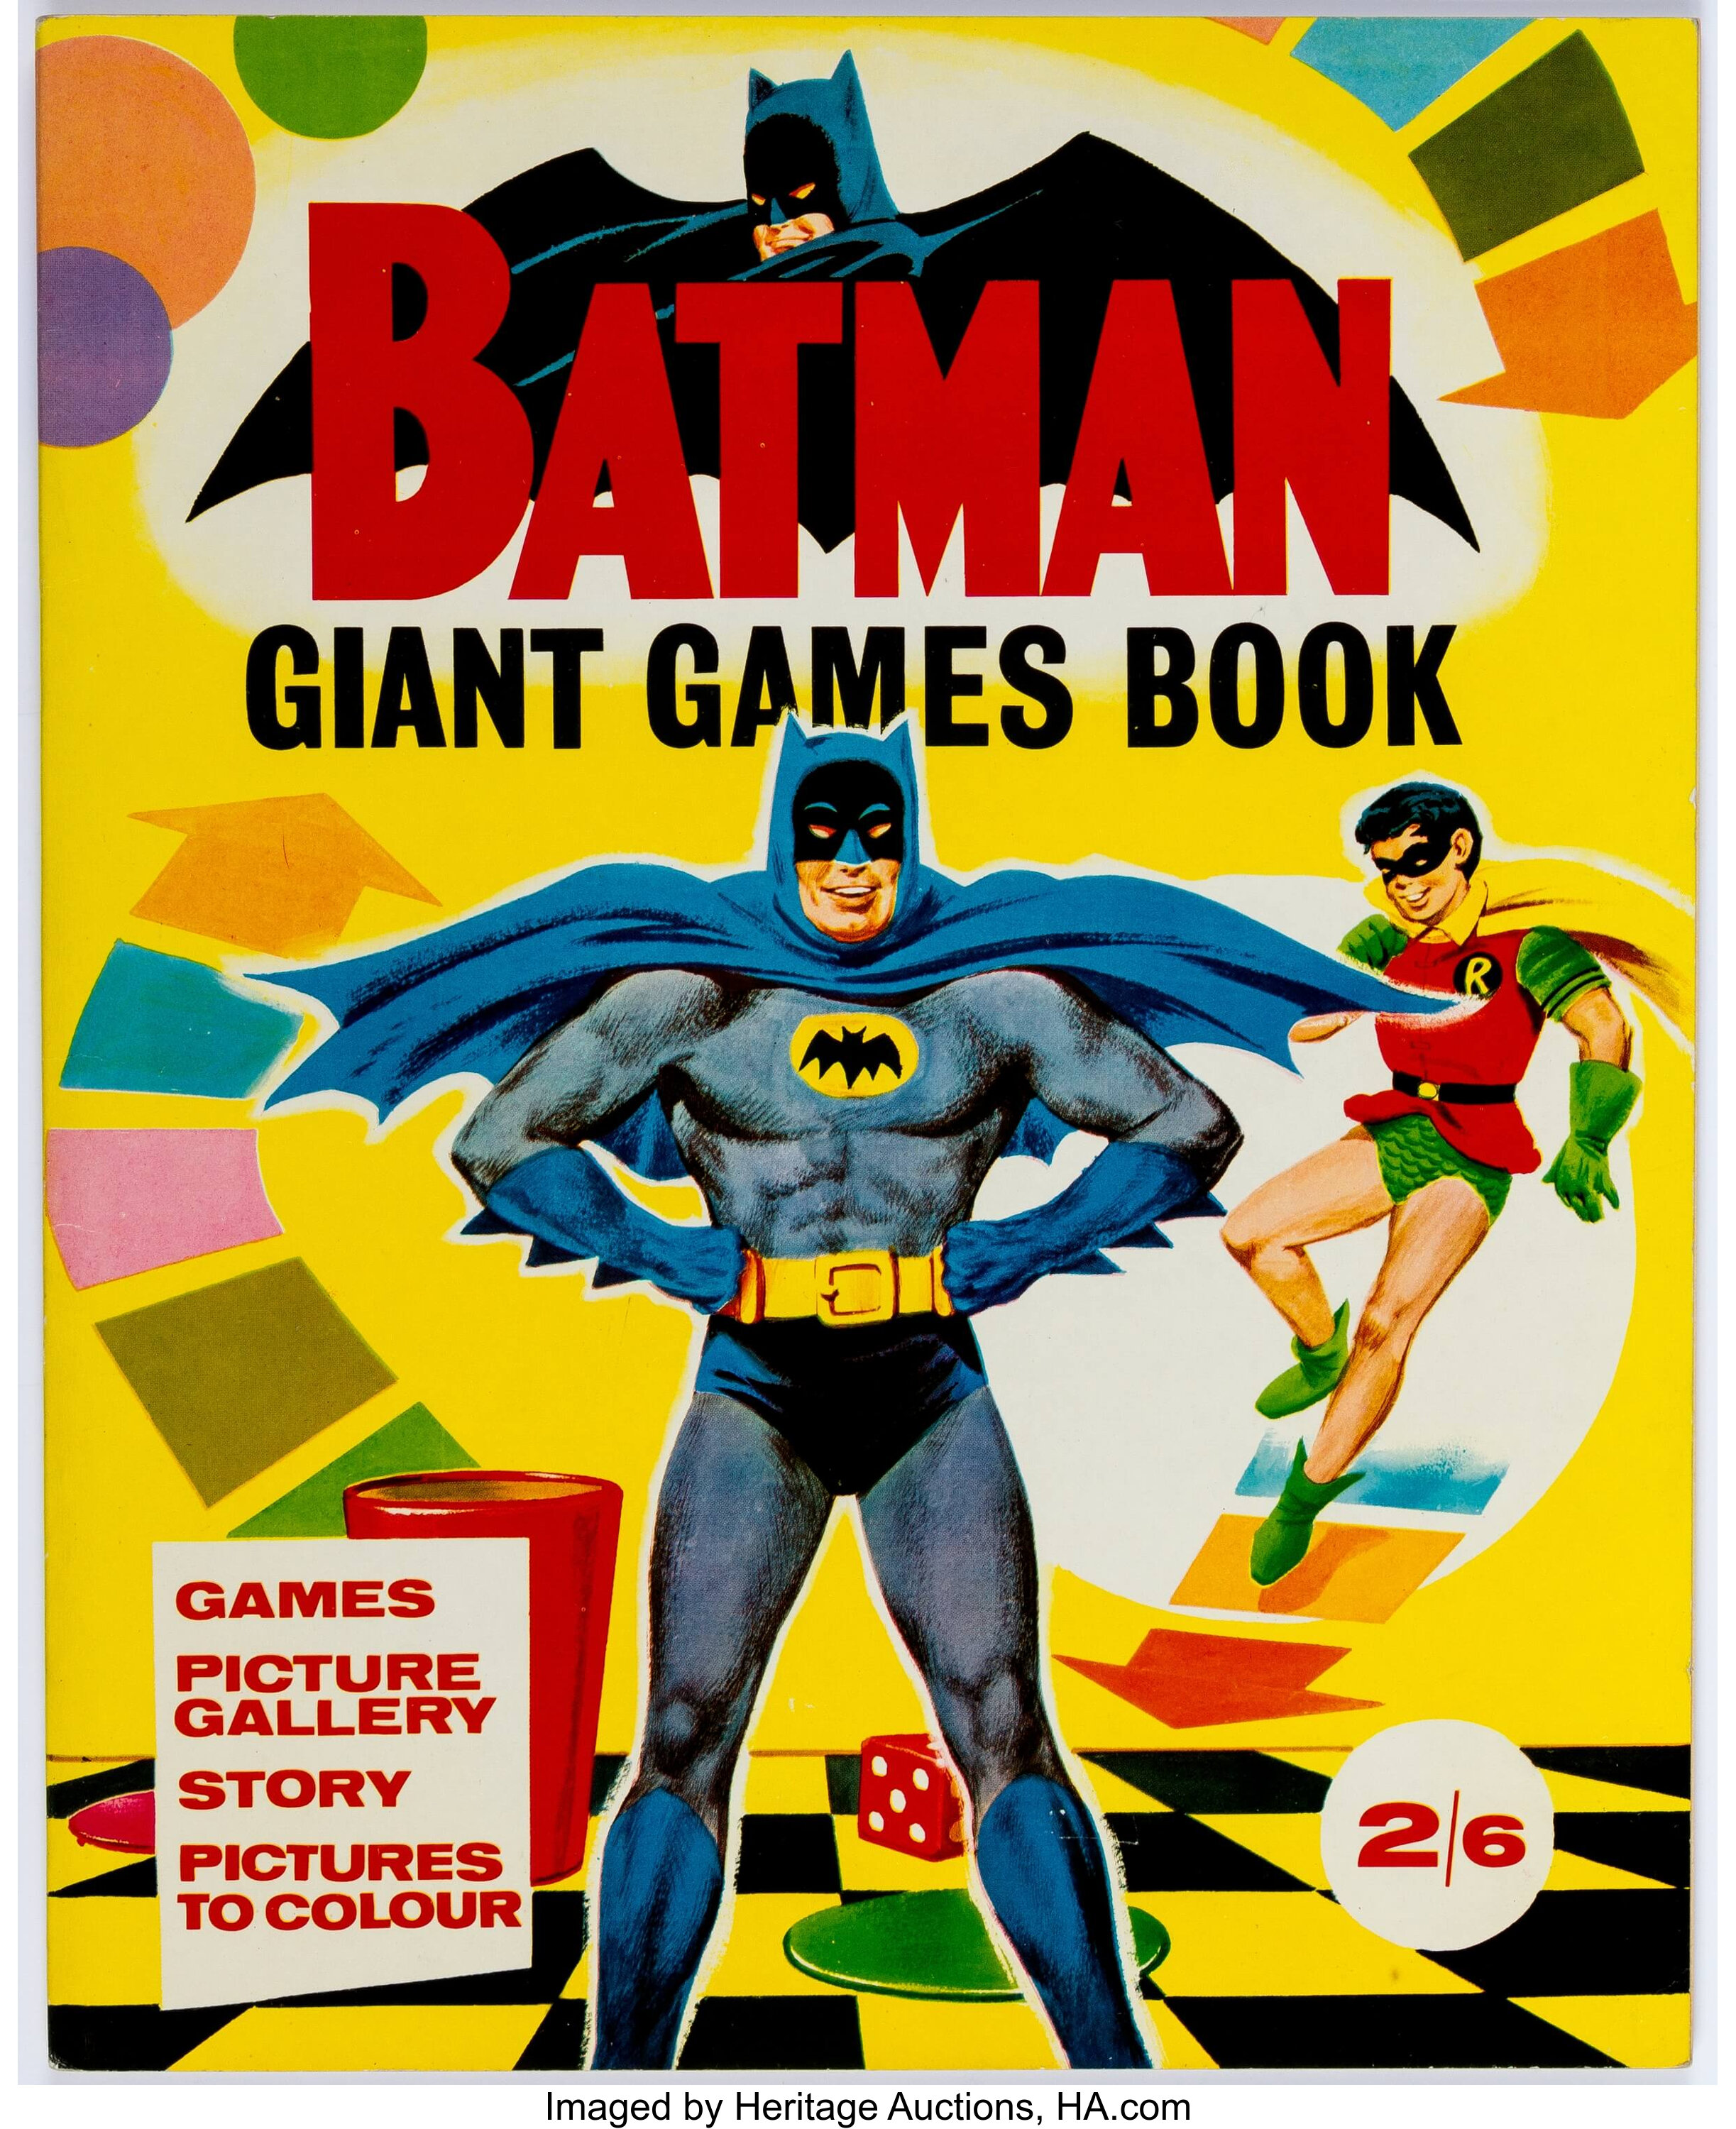 Batman Giant Games Book (World Distributors Limited, 1966) | Lot #12764 |  Heritage Auctions